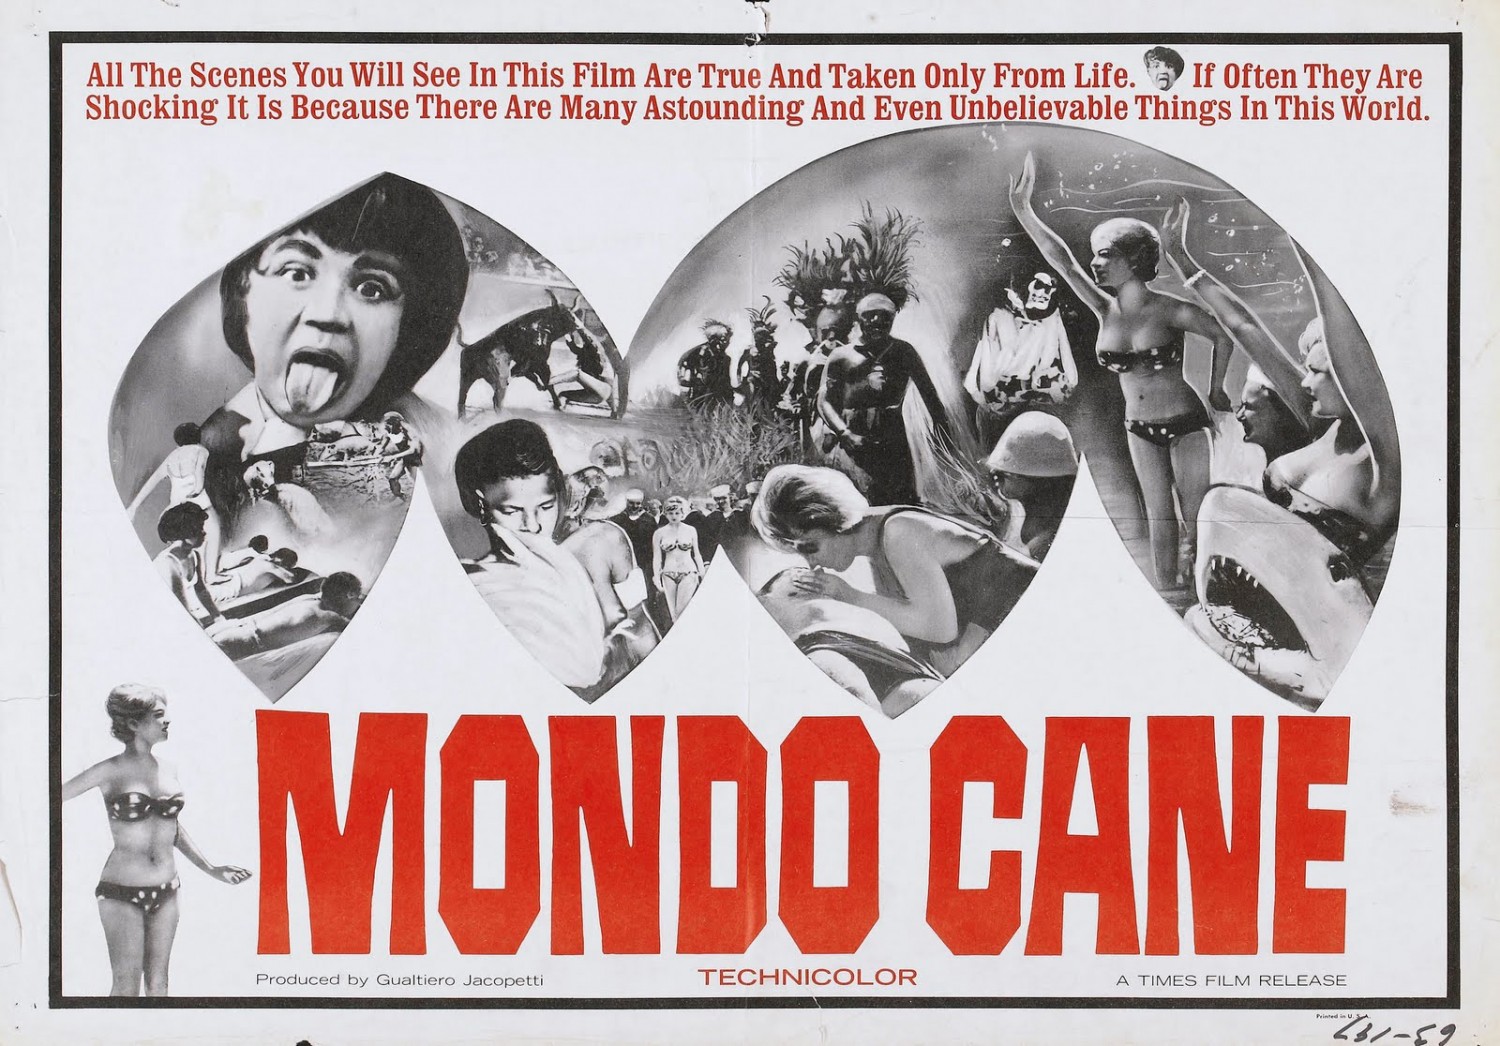 Extra Large Movie Poster Image for Mondo cane (#2 of 6)